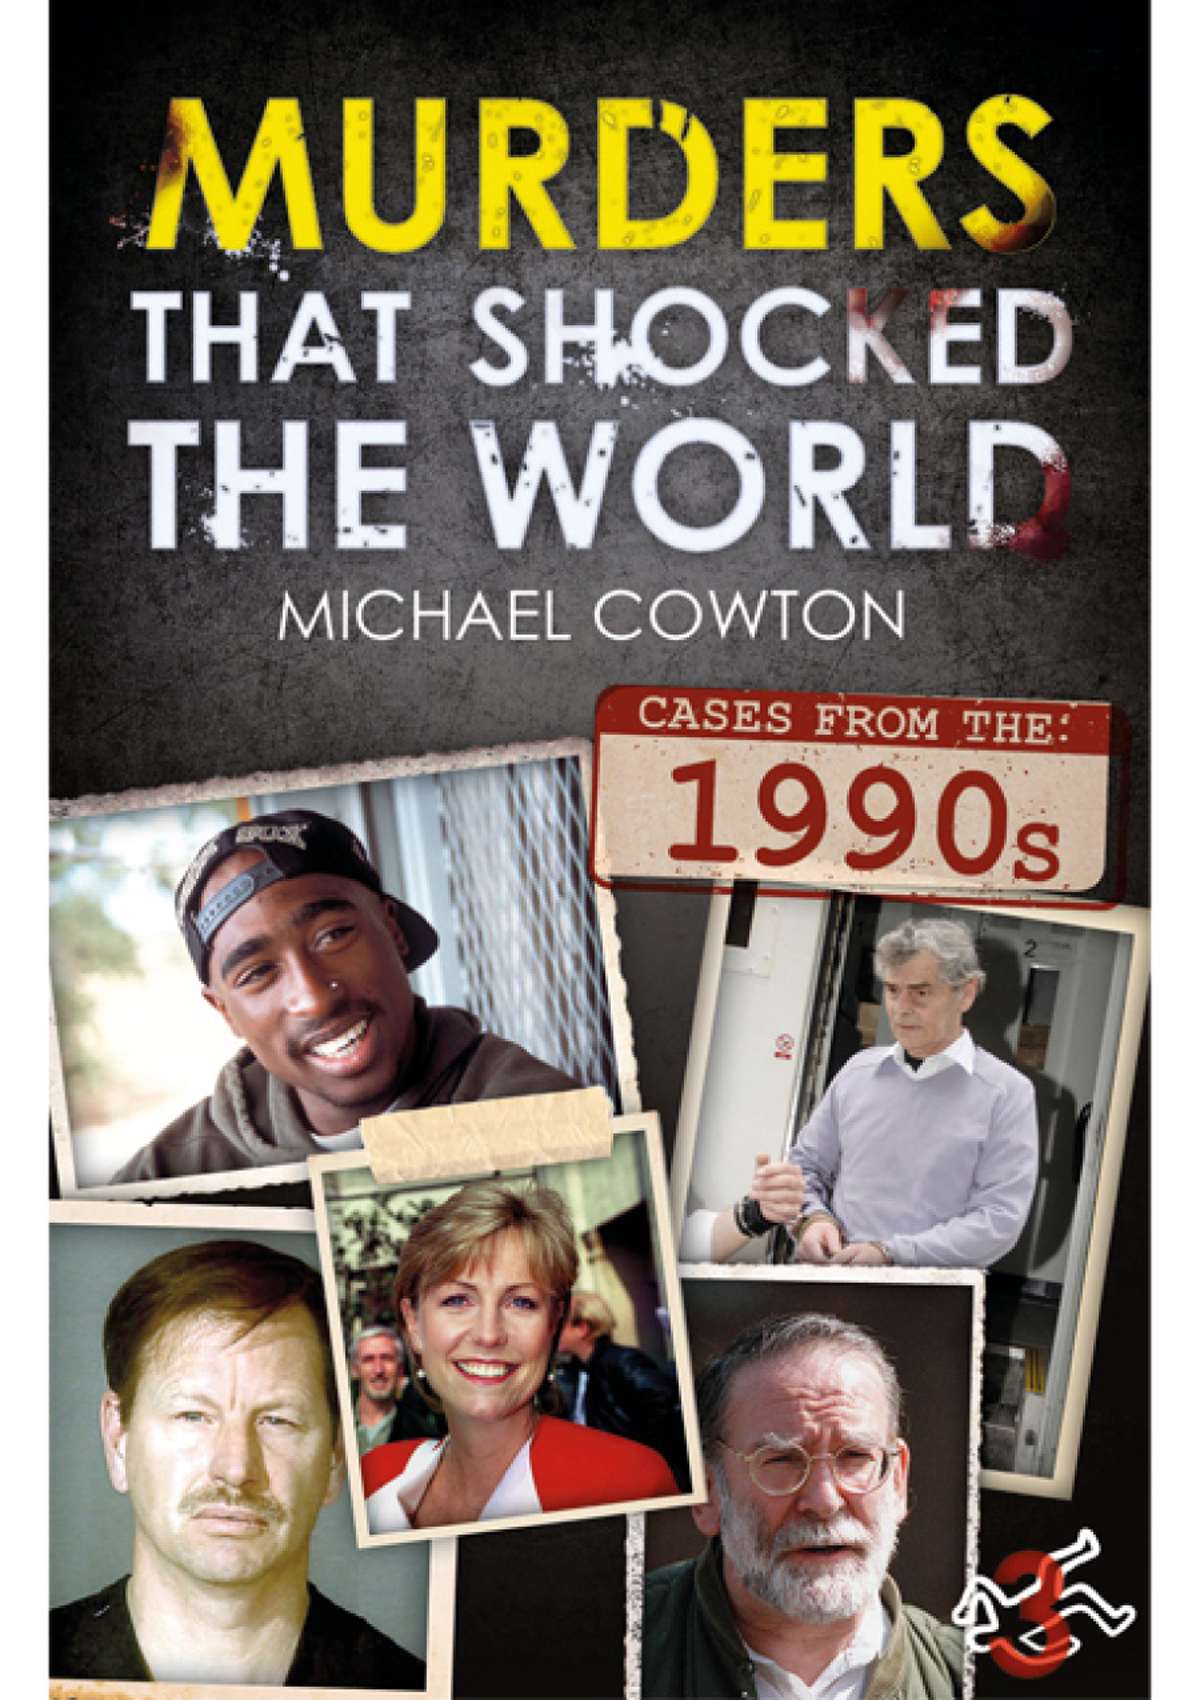 8559 - Murders That Shocked The World 1990s